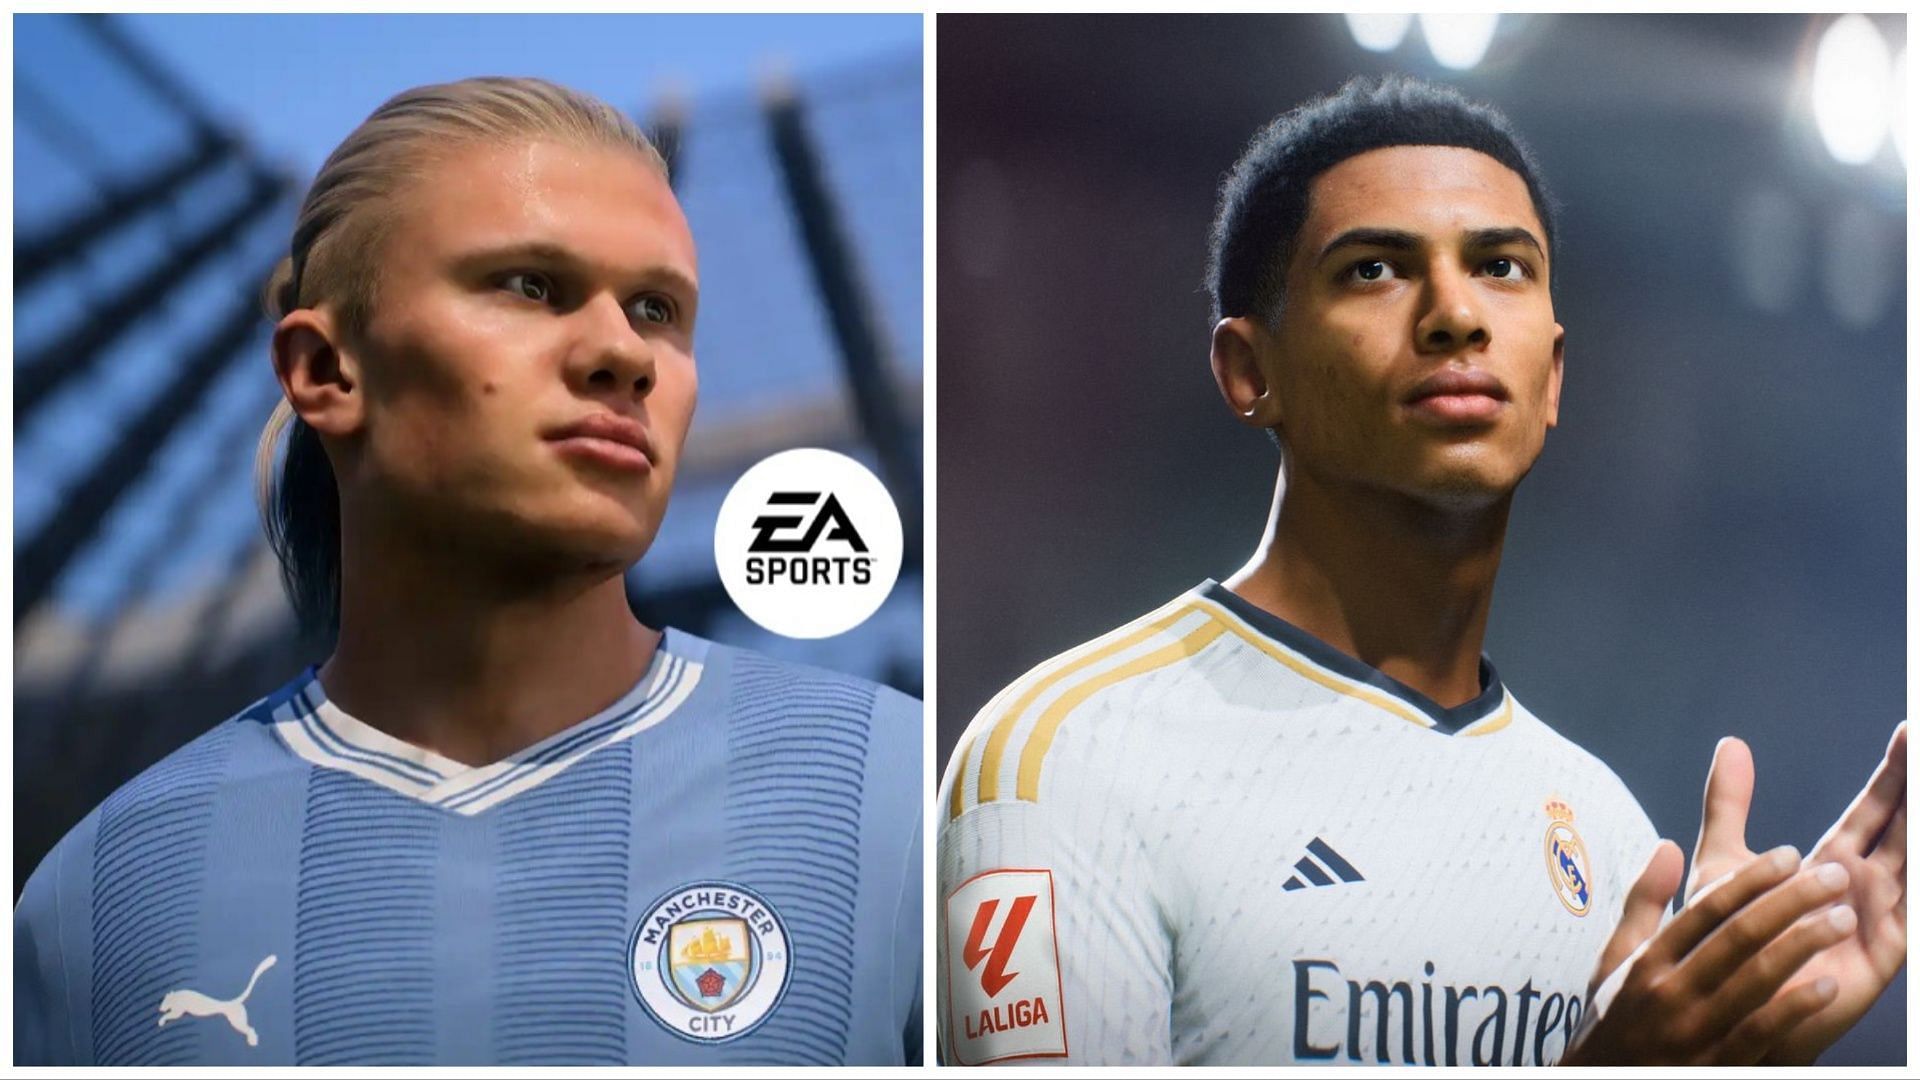 FIFA 23 Career Mode Details and Trailer Revealed